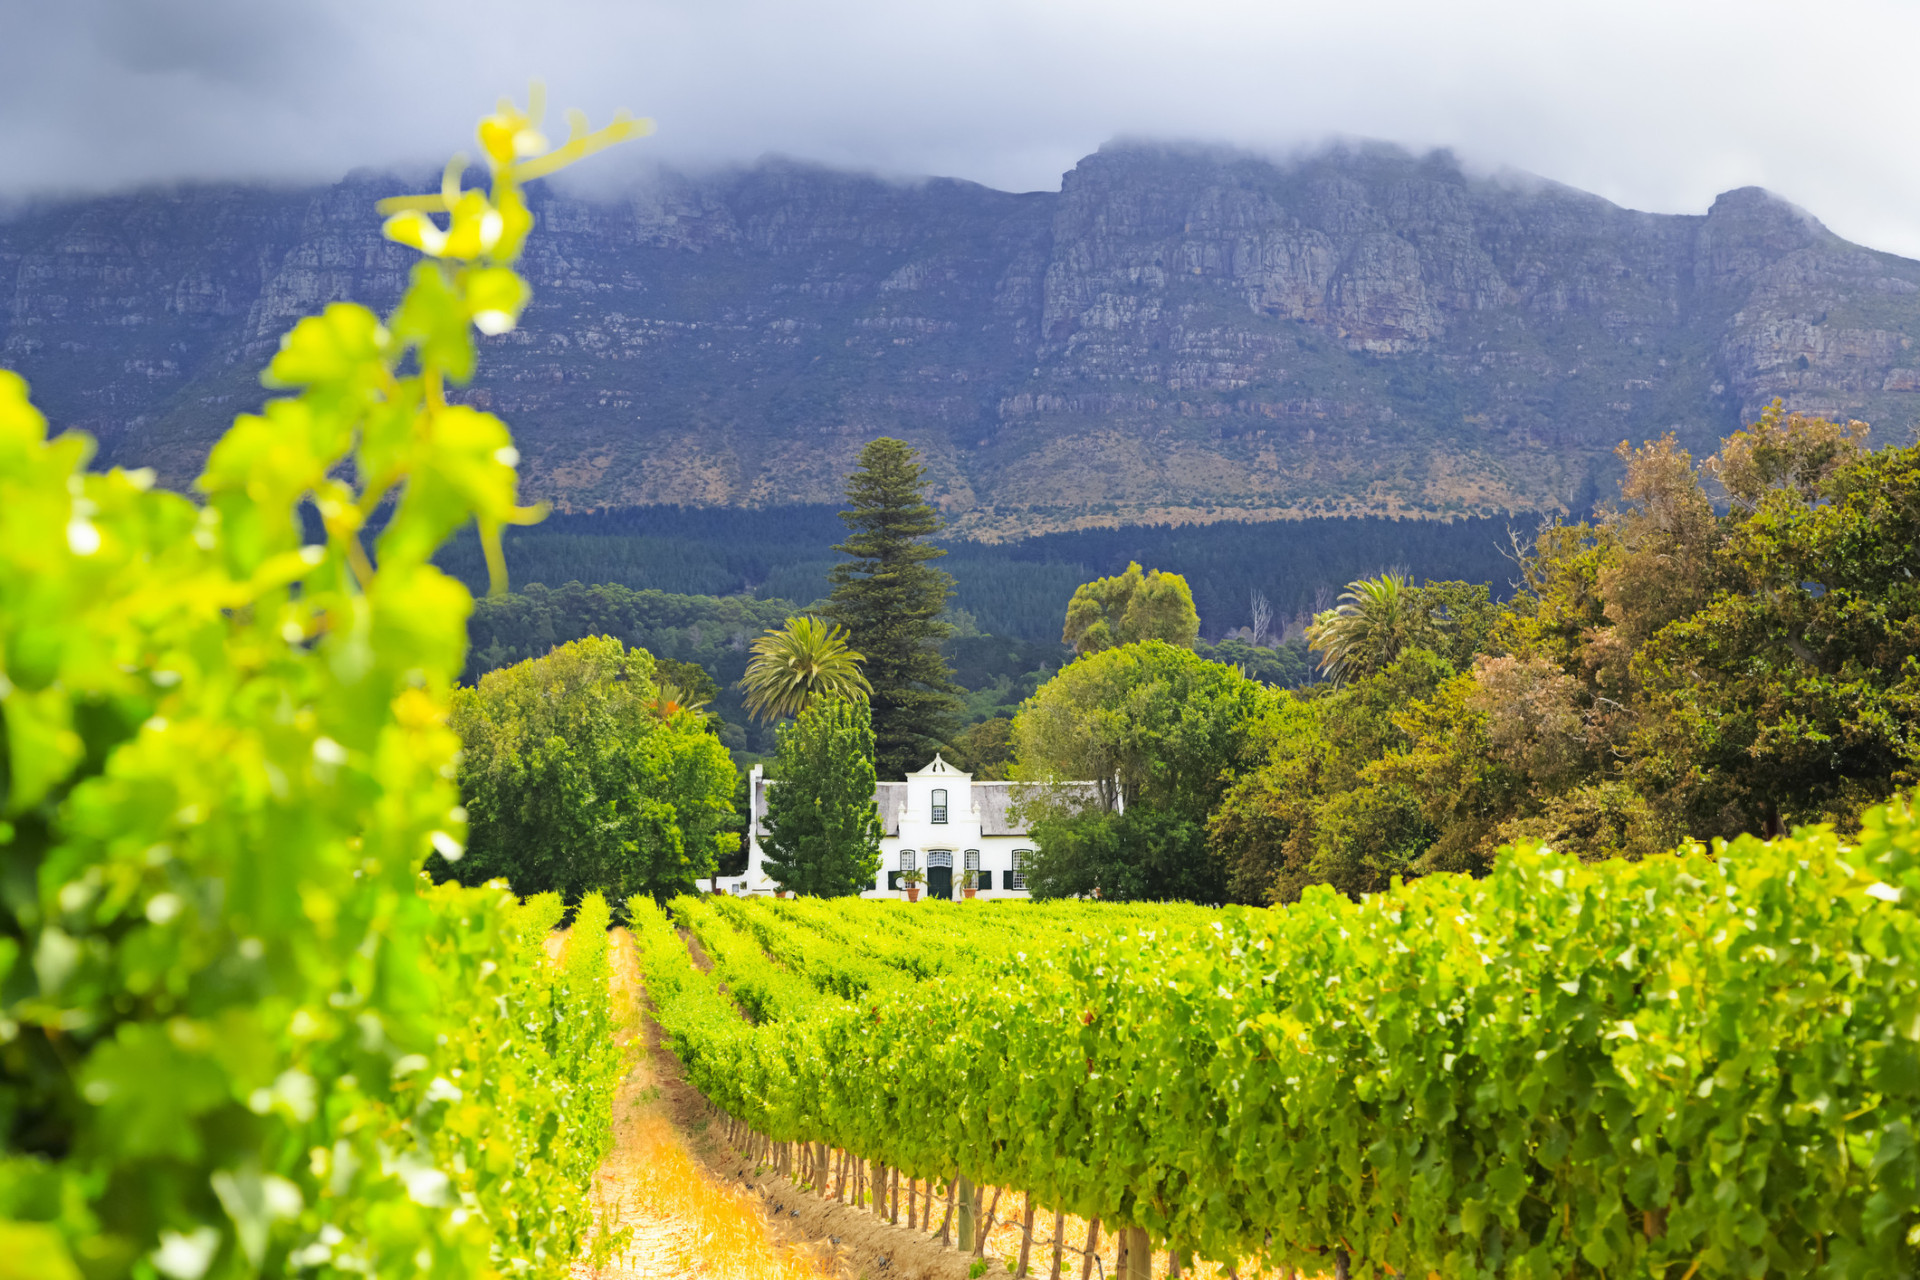 Ripe with wine regions, the area around Cape Town with its dramatic mountain backdrop provides one of the most memorable wine-tasting locations you're ever likely to encounter.<p><a href="https://www.msn.com/en-us/community/channel/vid-7xx8mnucu55yw63we9va2gwr7uihbxwc68fxqp25x6tg4ftibpra?cvid=94631541bc0f4f89bfd59158d696ad7e">Follow us and access great exclusive content every day</a></p>